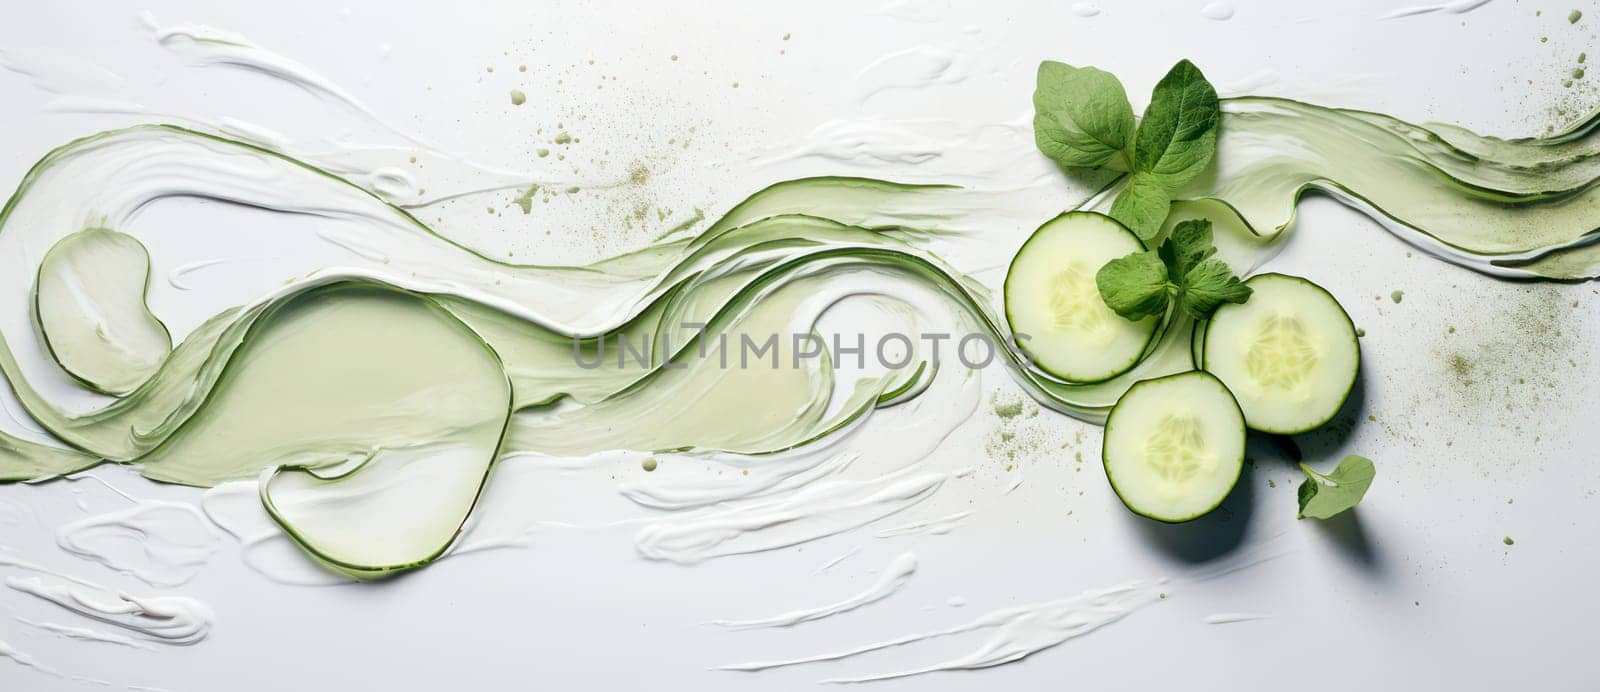 Fresh Cucumber: A Natural and Healthy Spa Treatment for Green Beauty and Body Care on a Wooden Table by Vichizh